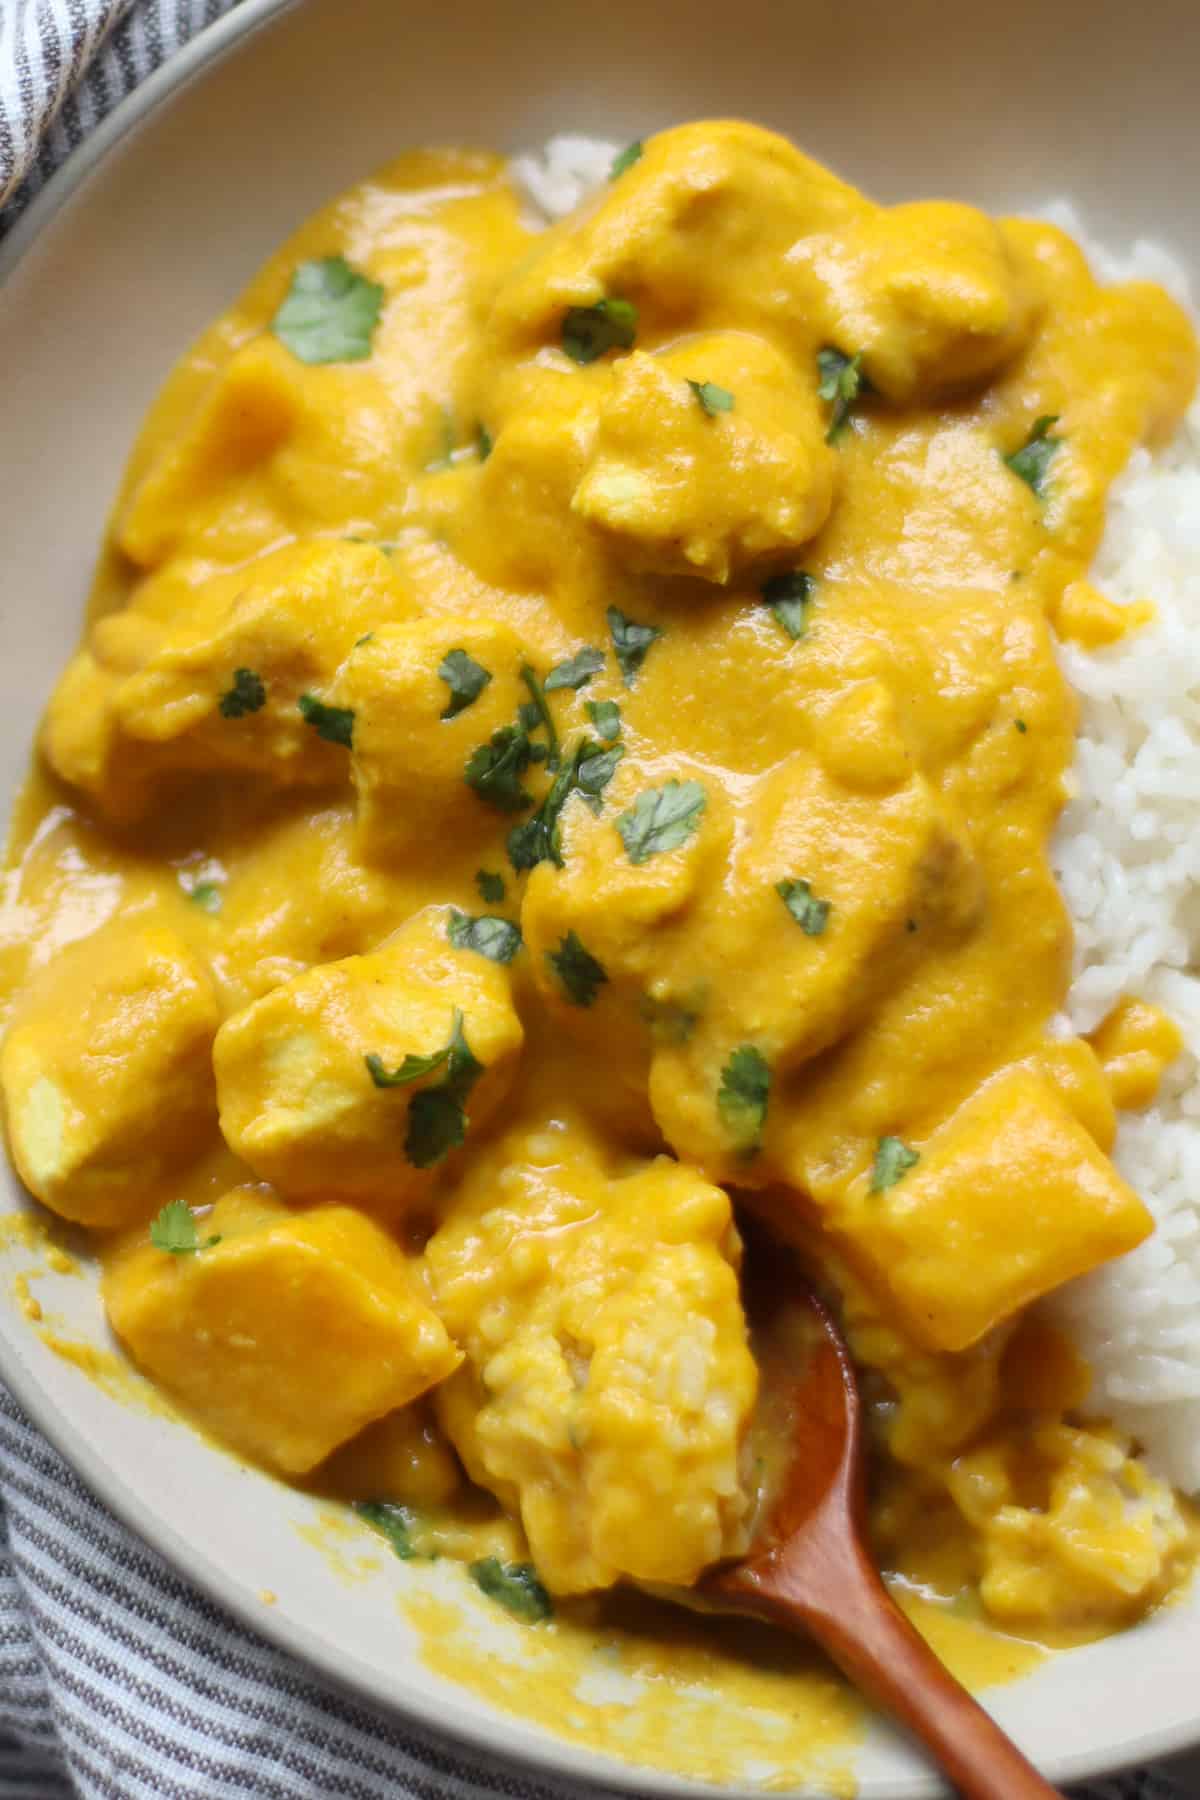 The finished dish of chicken mango curry served on a bed of rice.